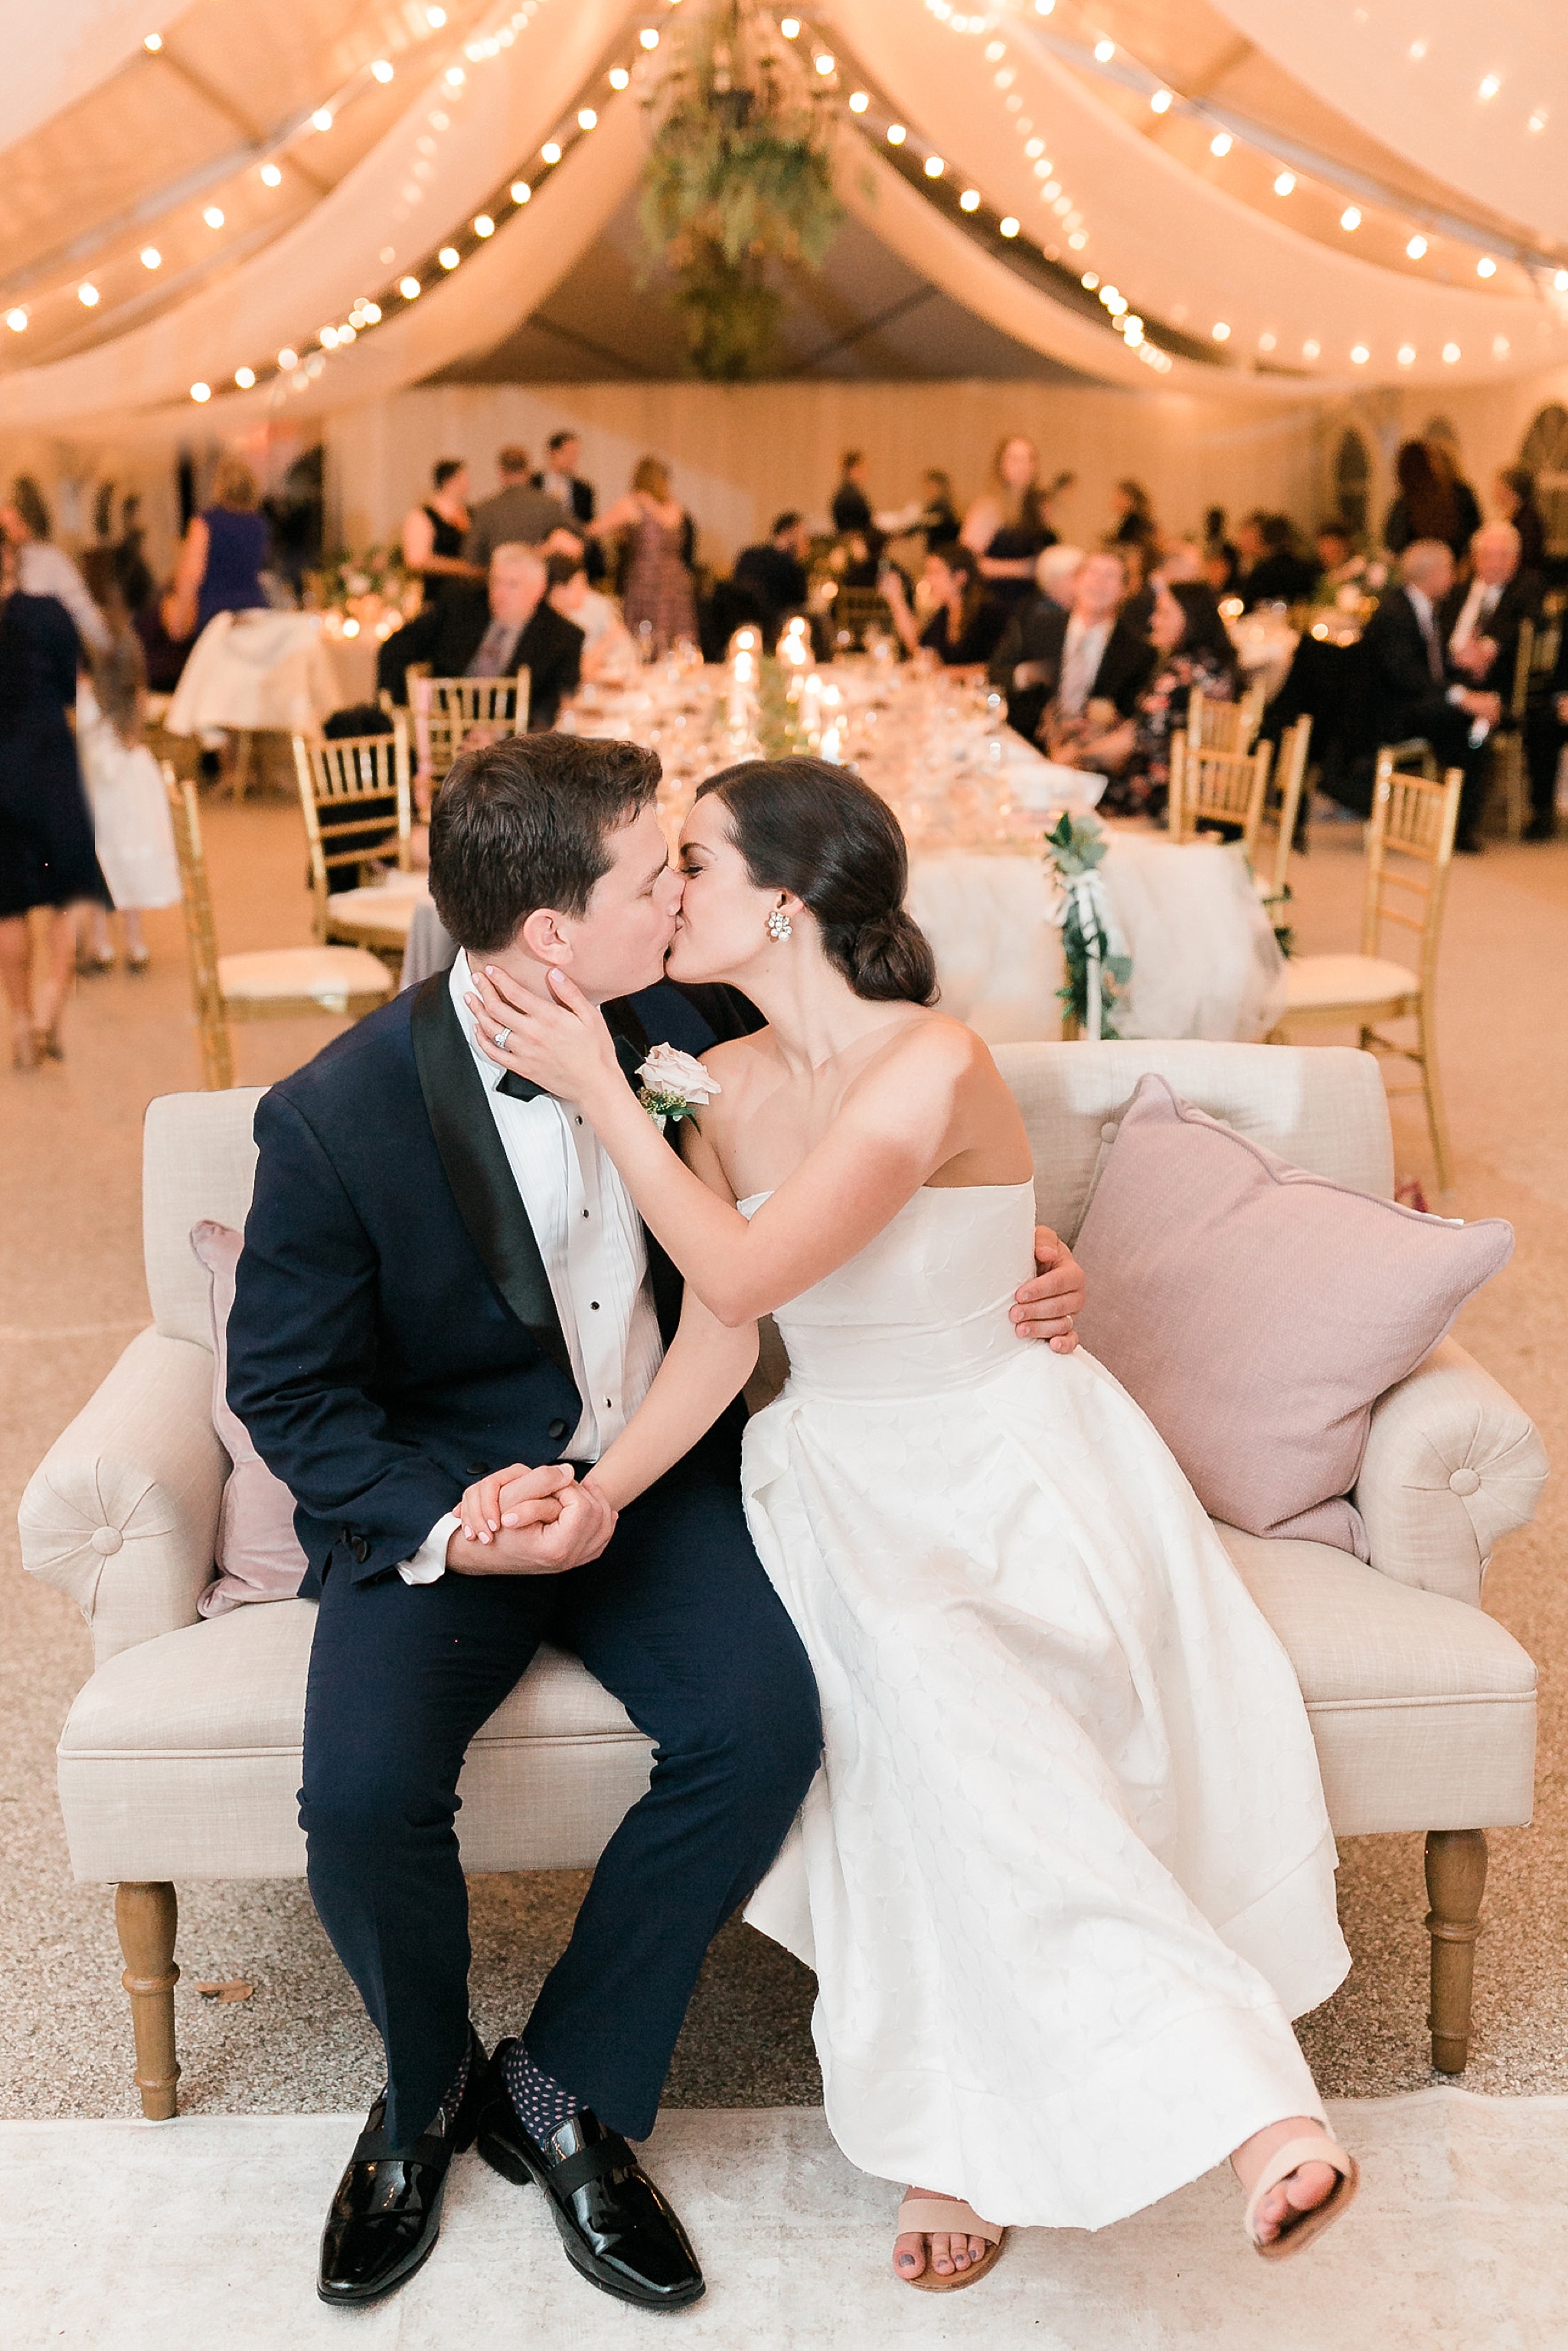 A chic and elegant wedding at The Rust Manor House in Leesburg, VA is full of handmade touches including a custom bar, dance floor, and hand-painted signage!